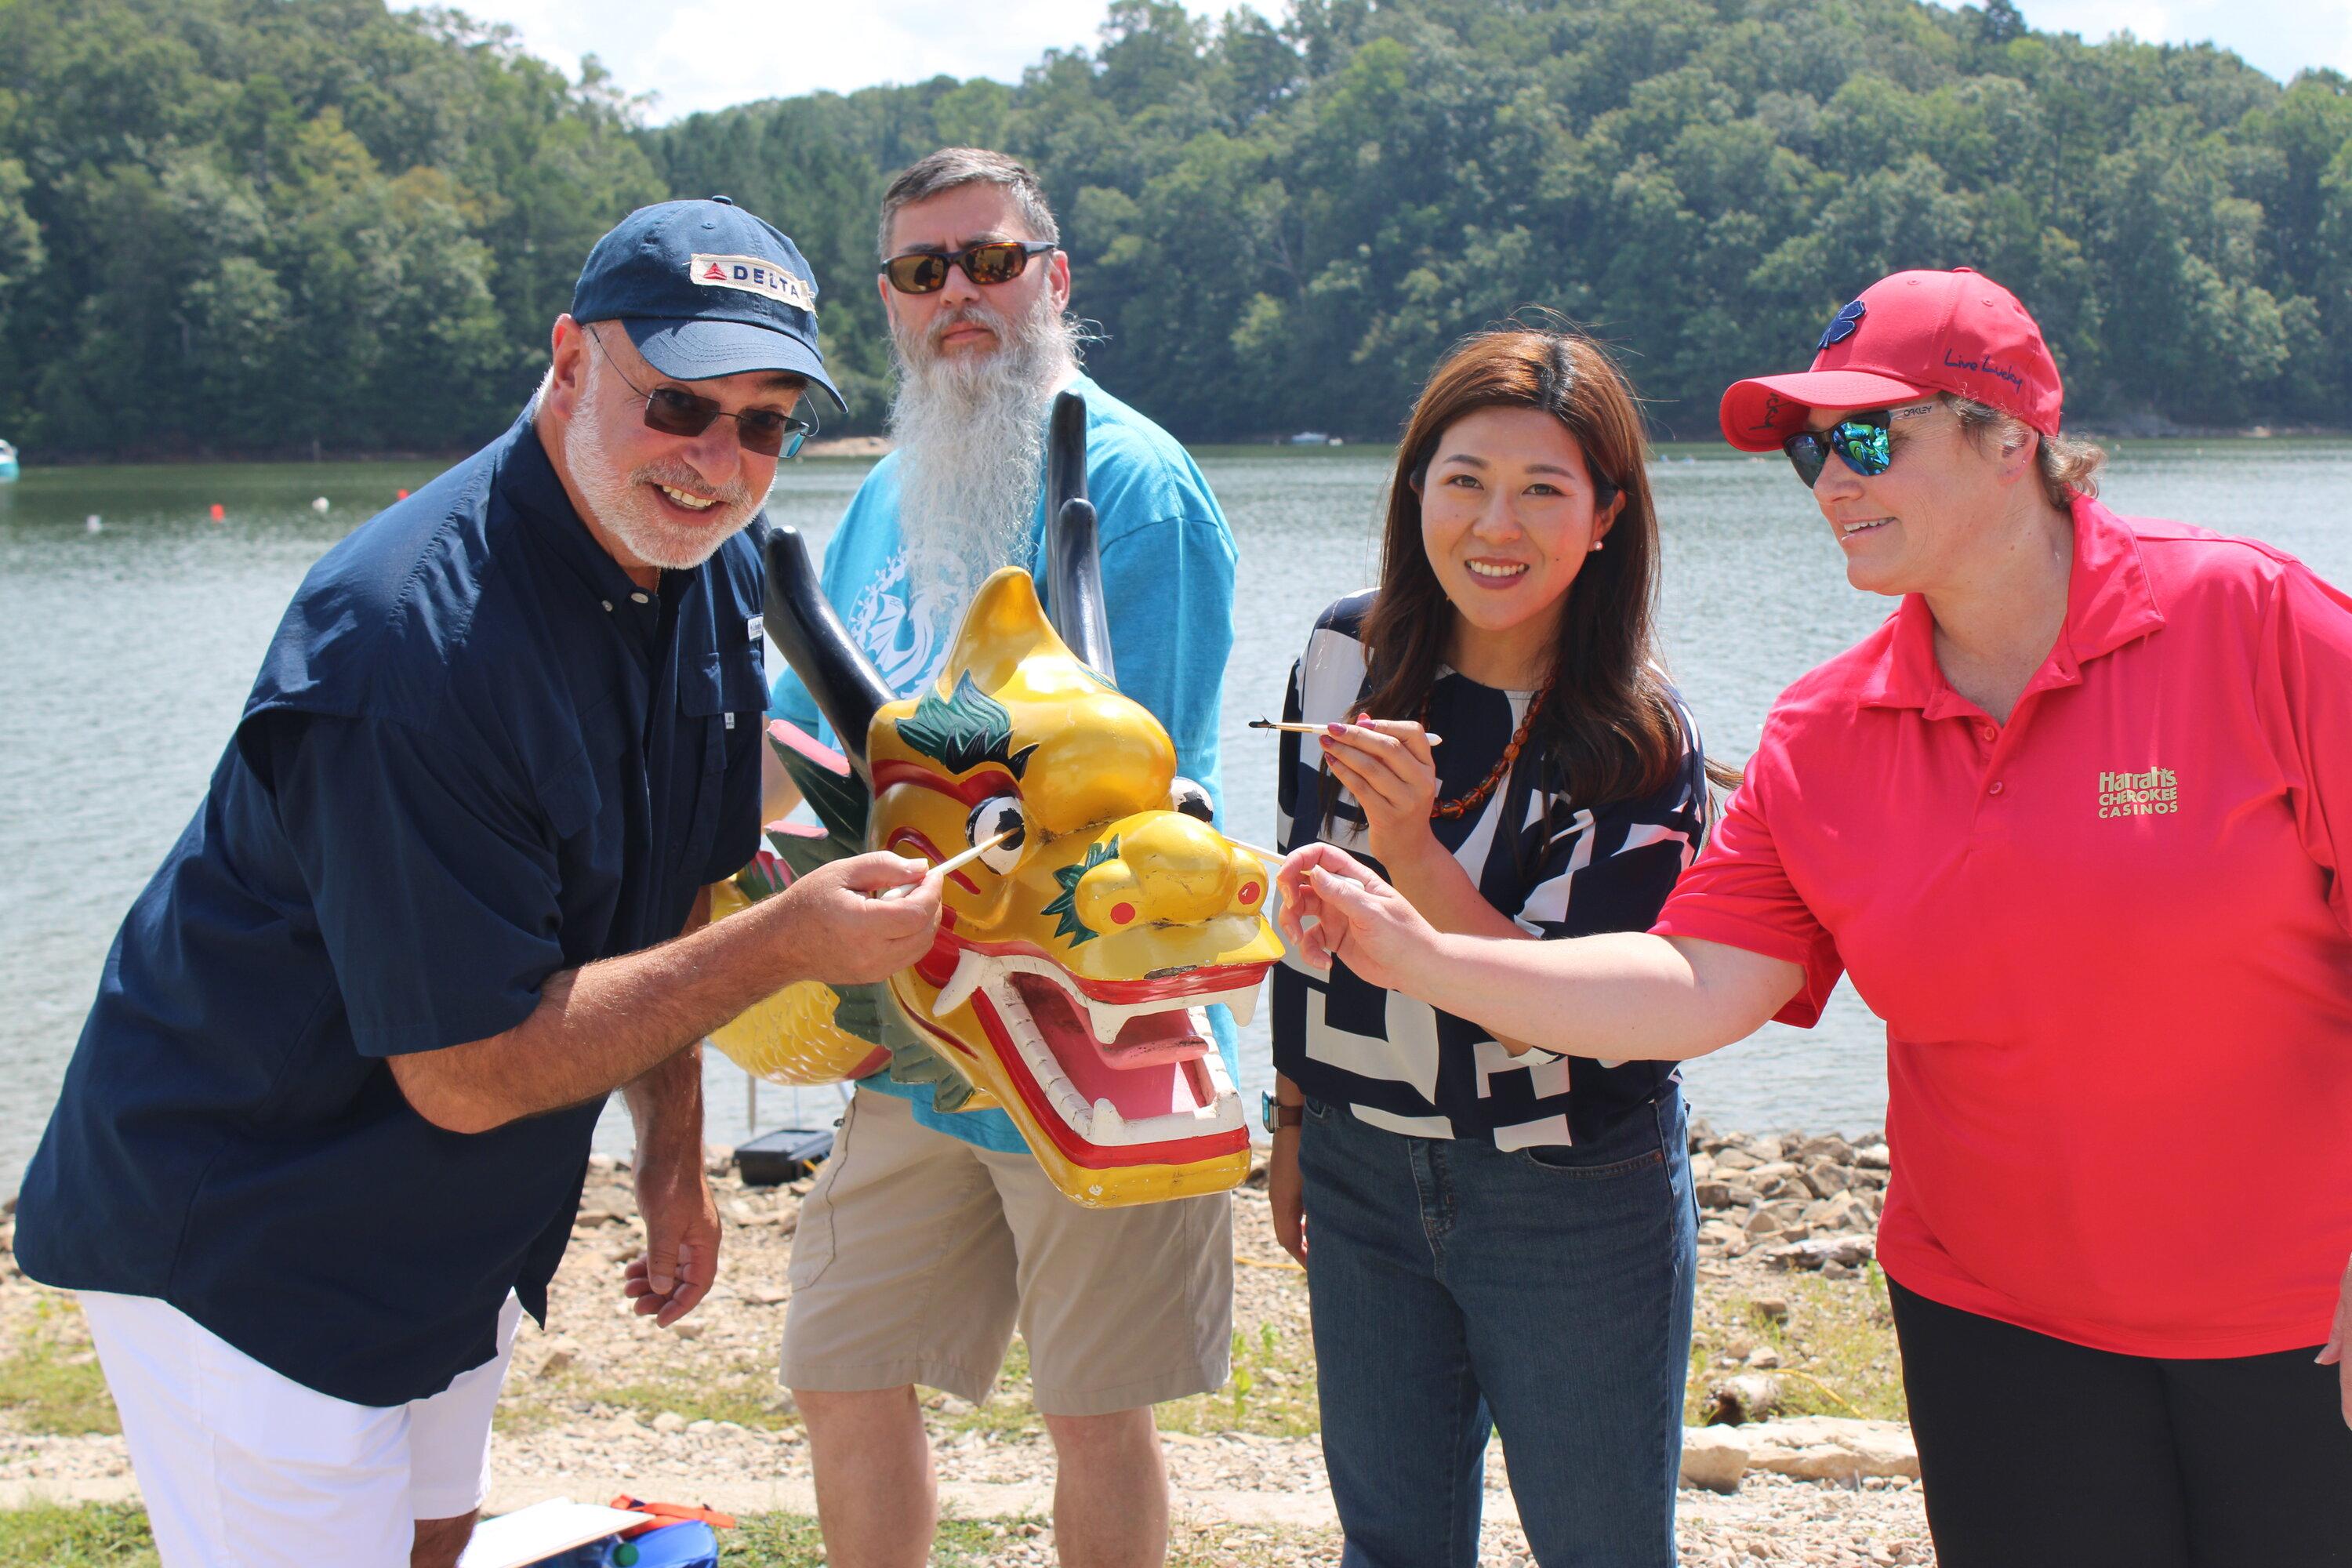 The new Director of the Hong Kong Economic and Trade Office in New York, Ms Maisie Ho (second right), officiated at the eye-dotting ceremony of the Atlanta Hong Kong Dragon Boat Festival on September 9 (Atlanta time).